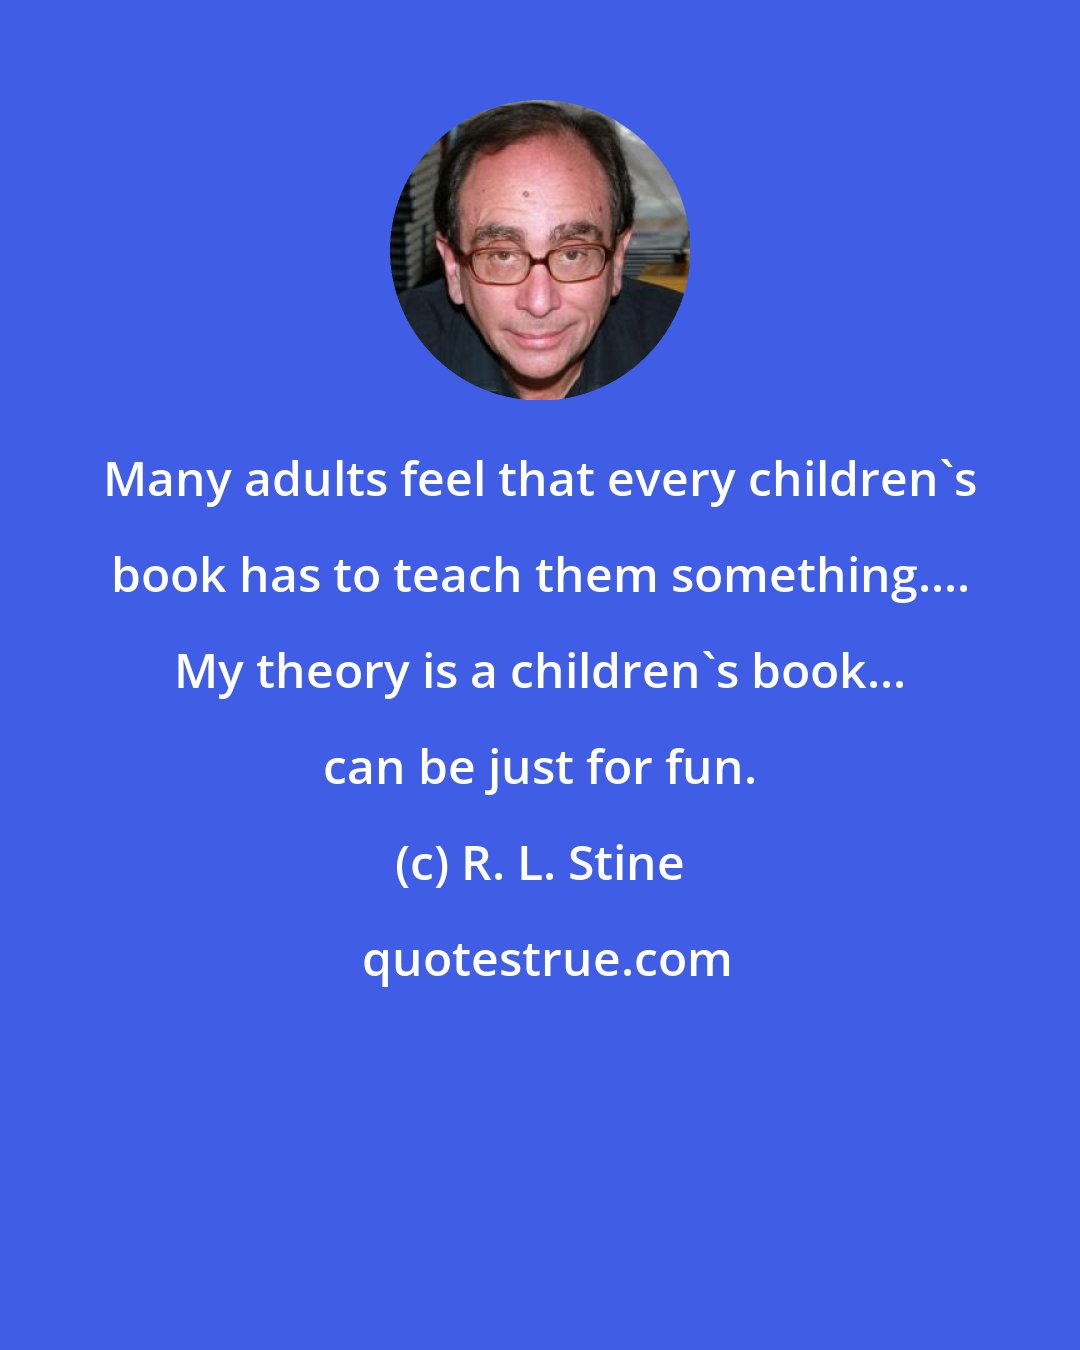 R. L. Stine: Many adults feel that every children's book has to teach them something.... My theory is a children's book... can be just for fun.